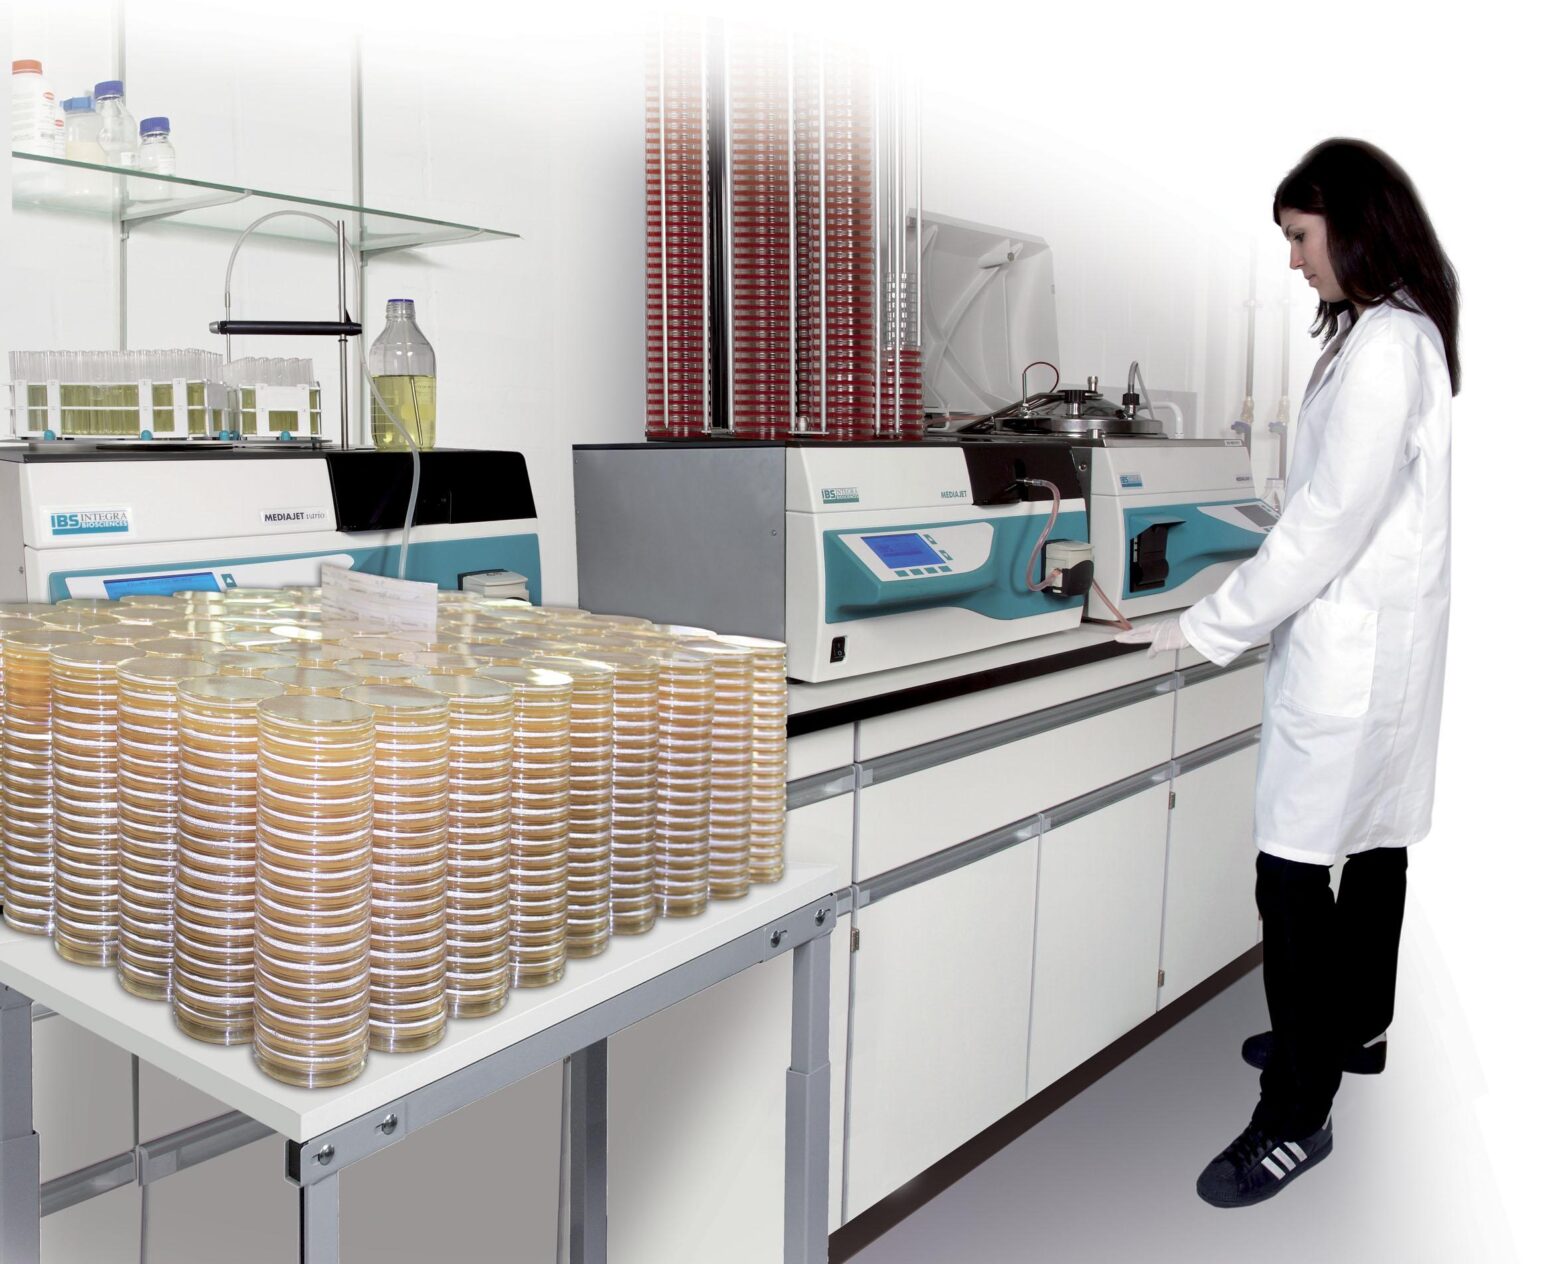 Global Automated Cell Culture Systems Industry